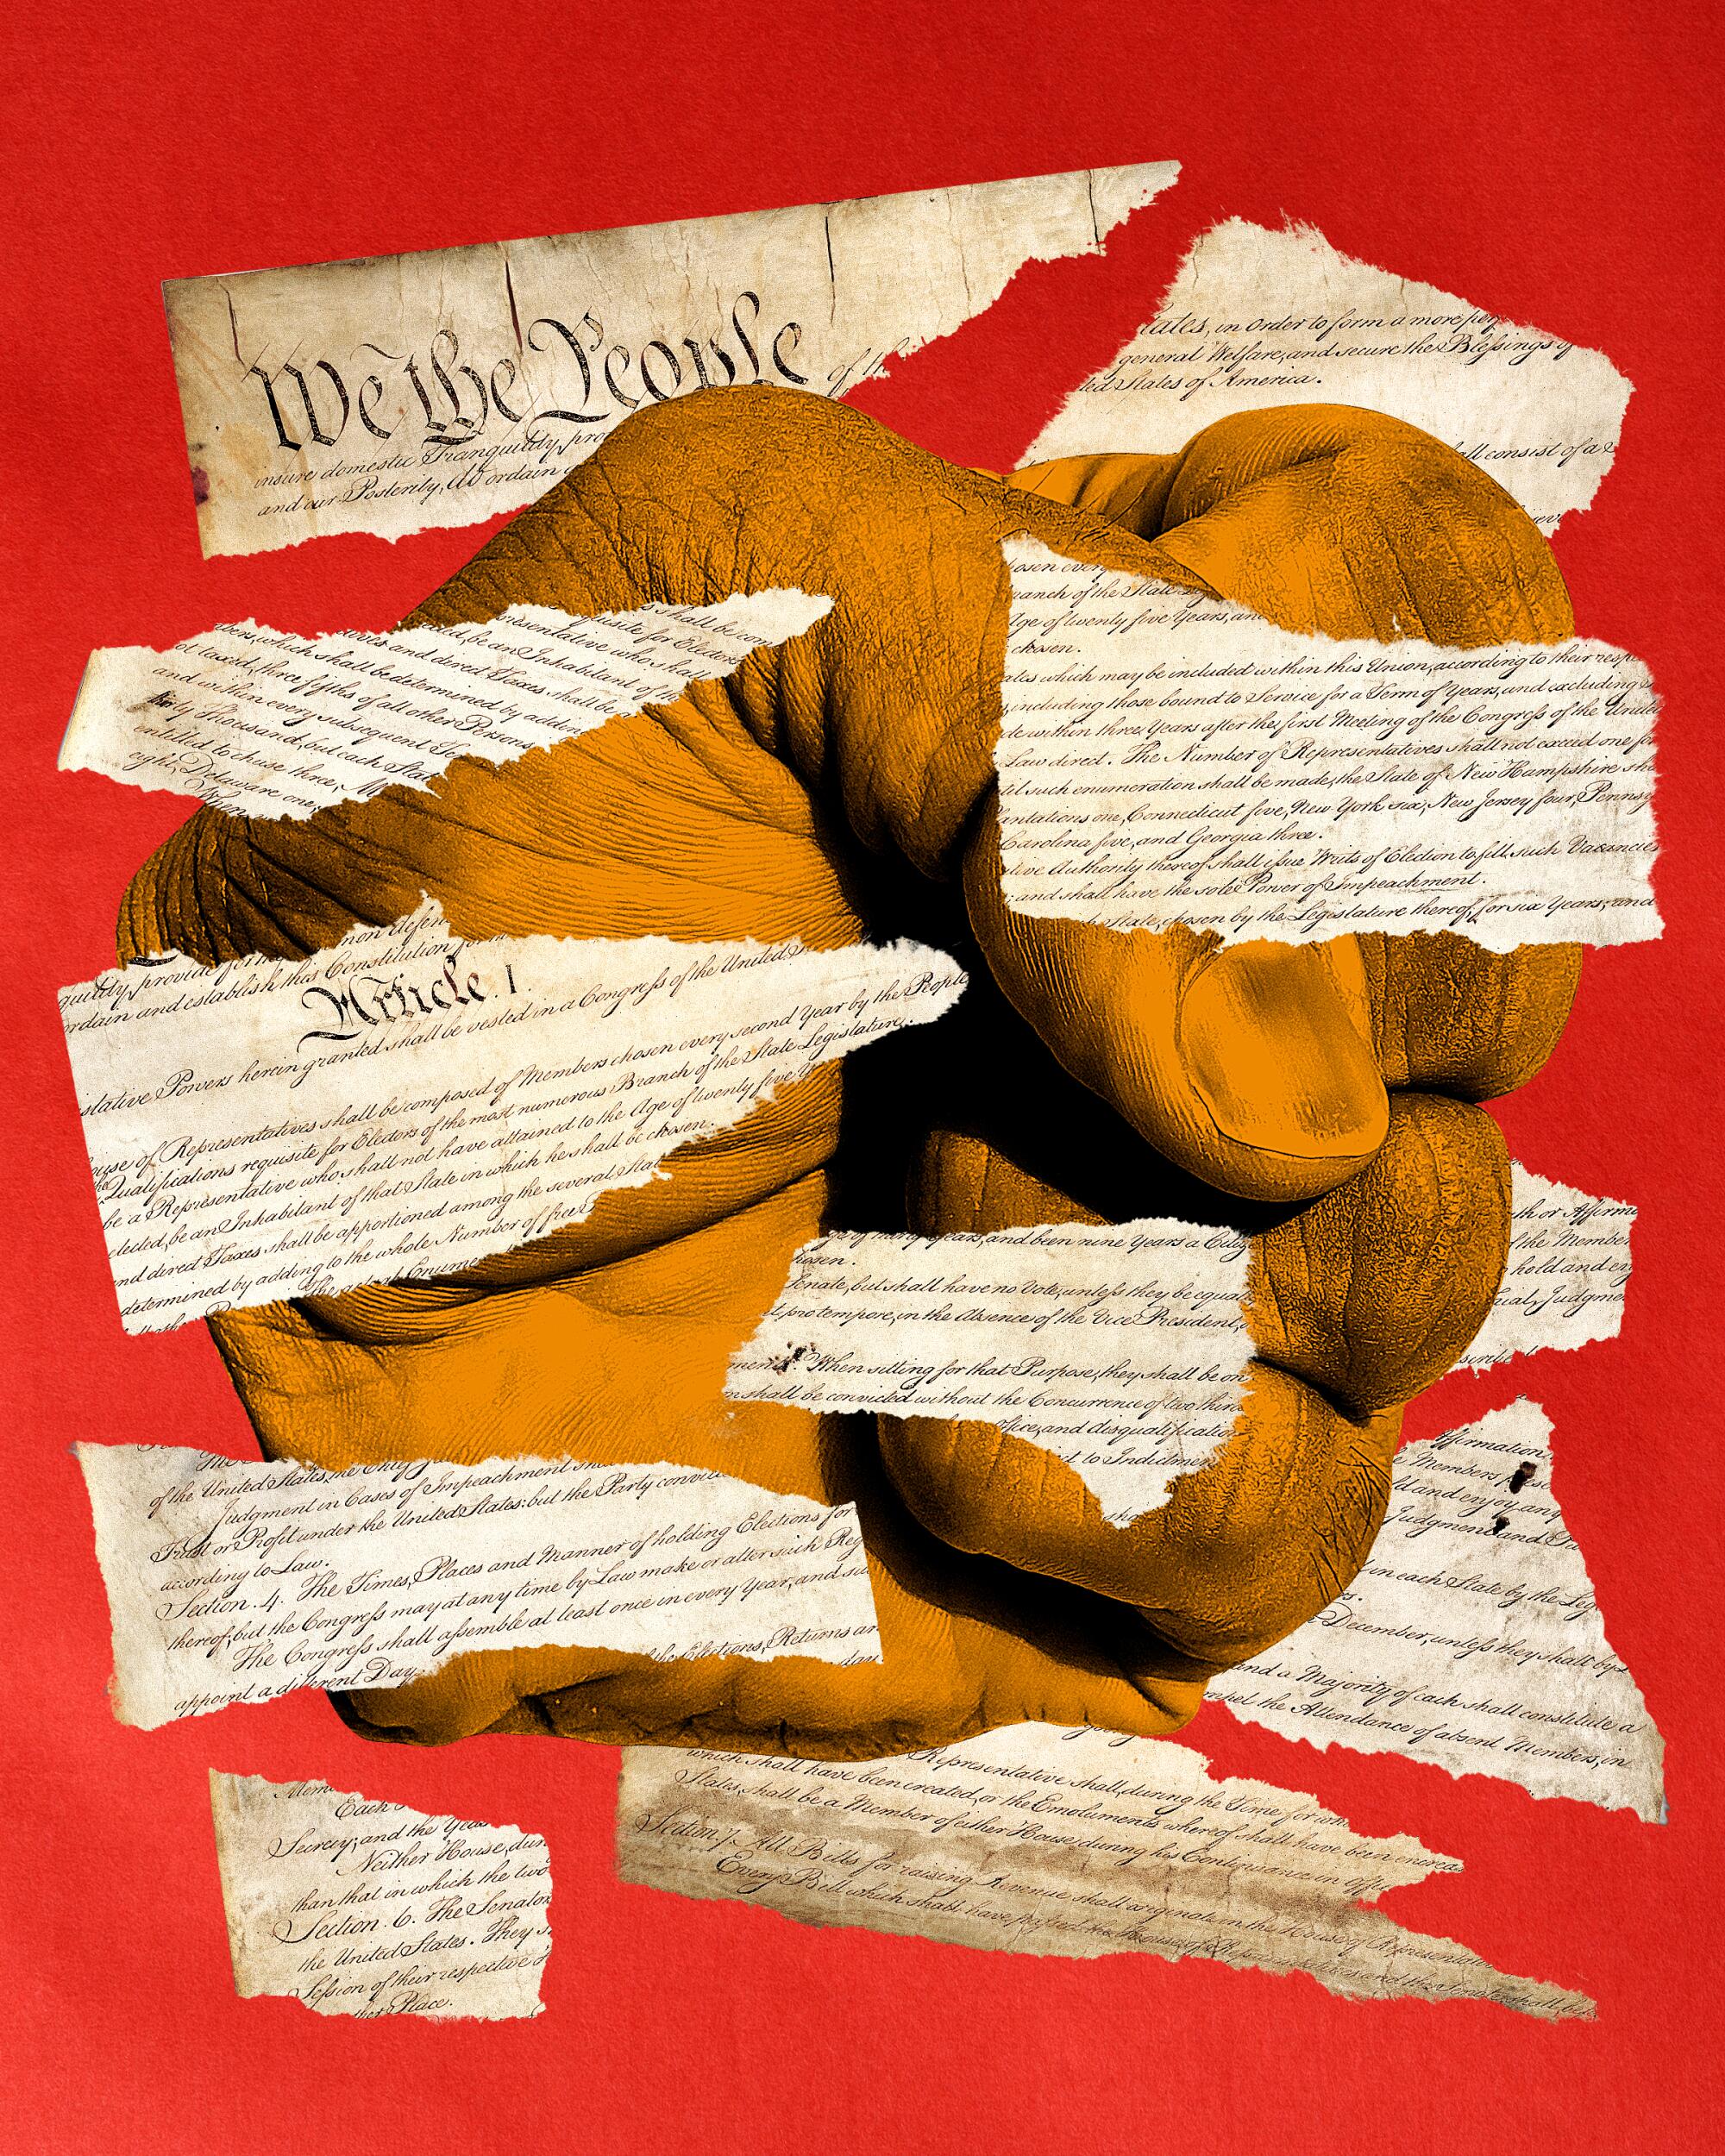 Photo illustration of an orange fist surrounded by torn pieces of the US Constitution on a red background